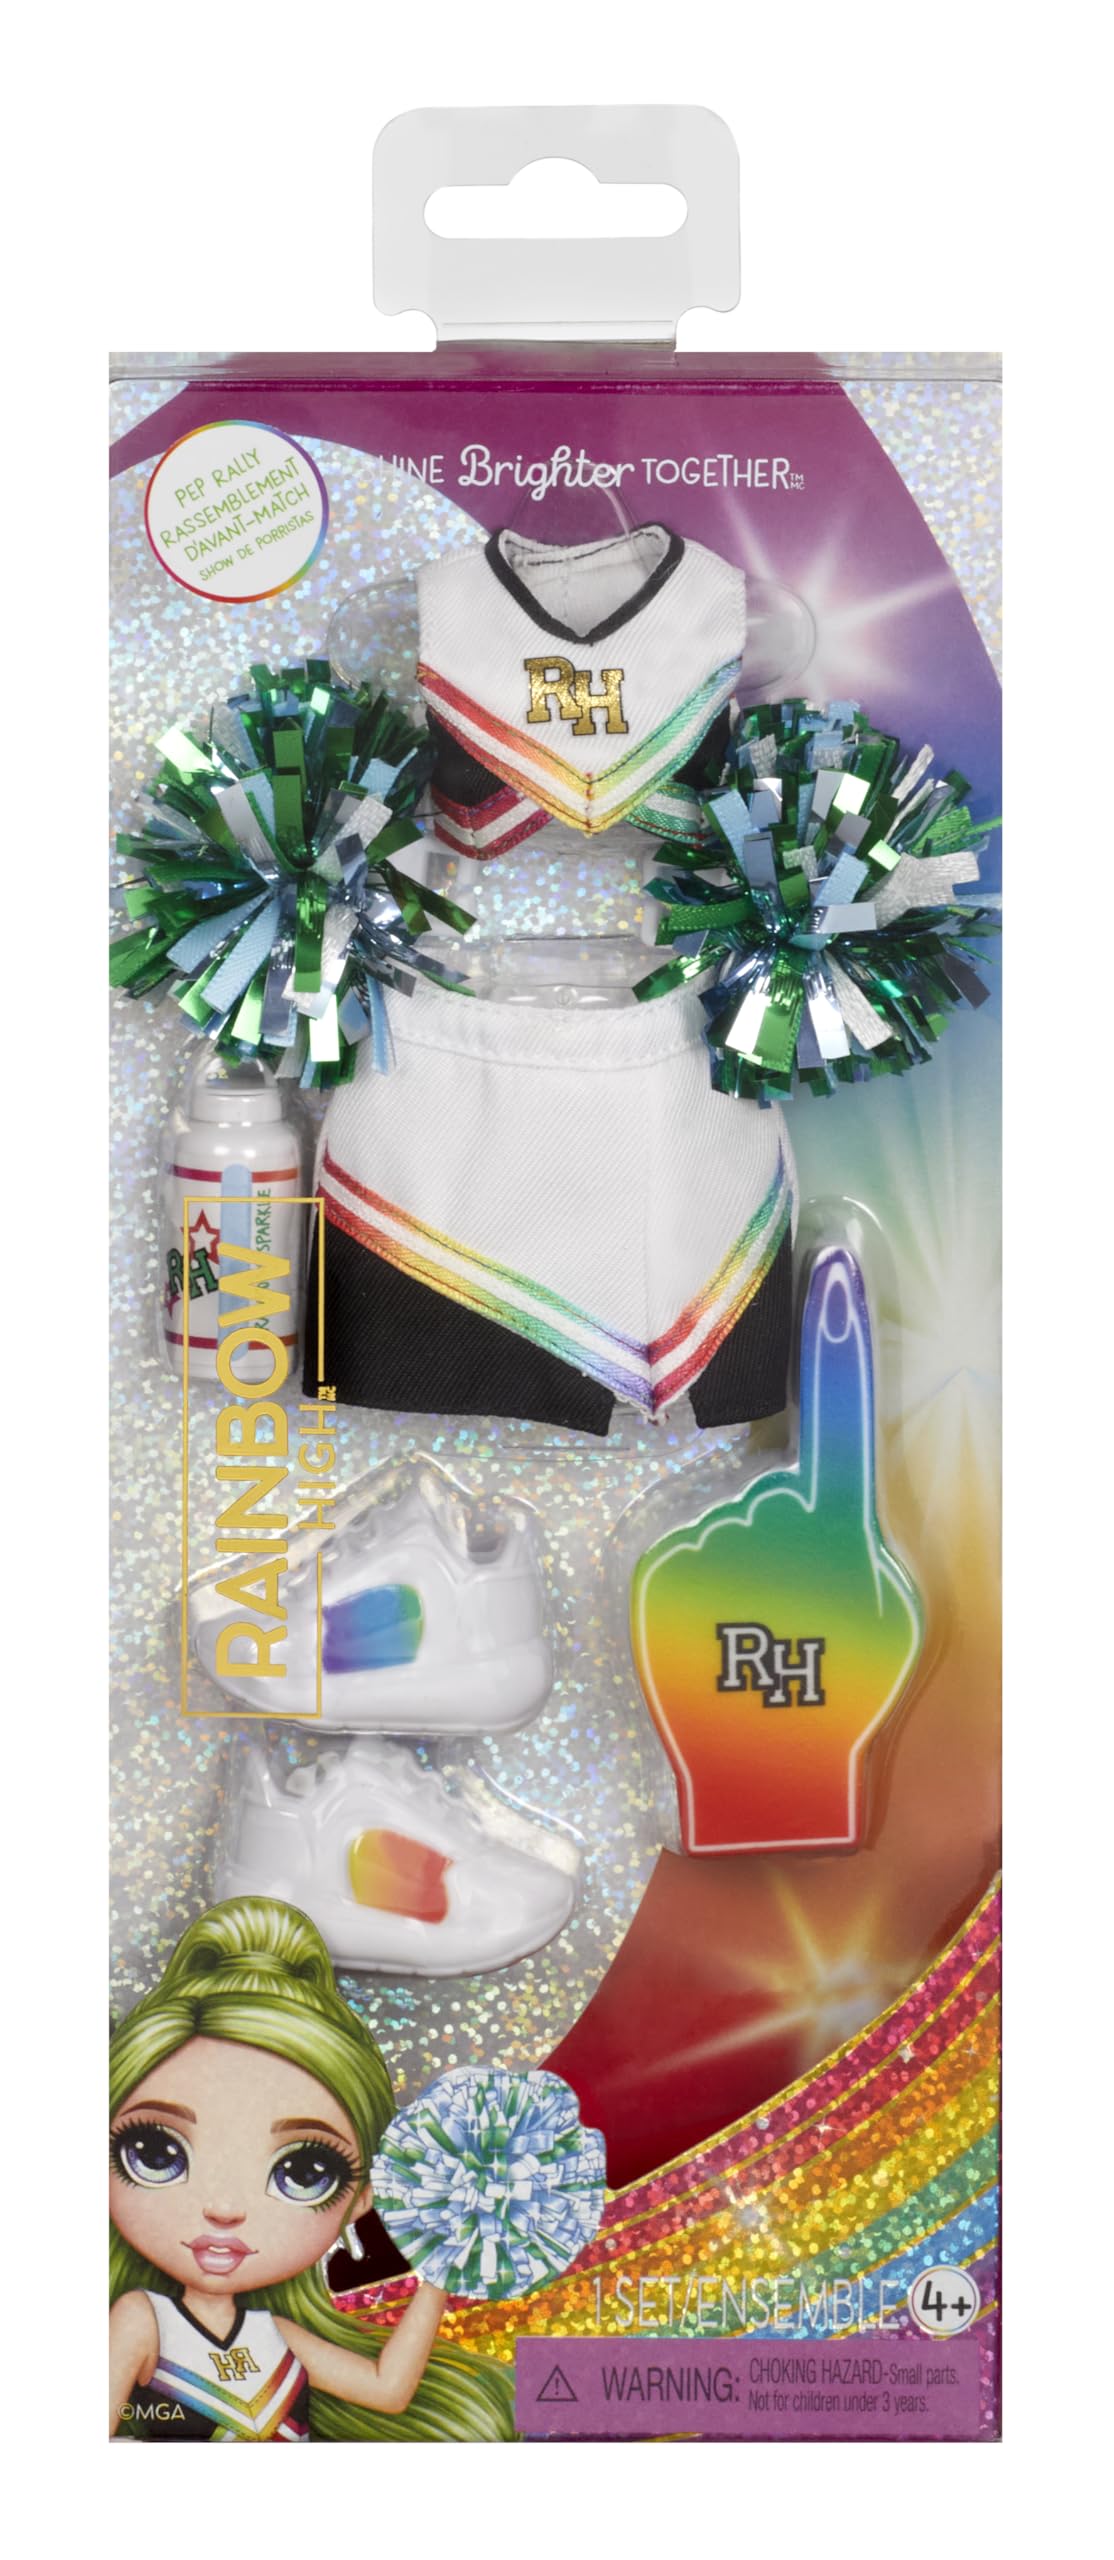 Rainbow High Fashion Packs, Includes Full Outfit, Shoes, Jewelry and Play Accessories. Mix & Match to Create Tons of Fun Looks. Kids Toy Gift Ages 4-12 Years Old